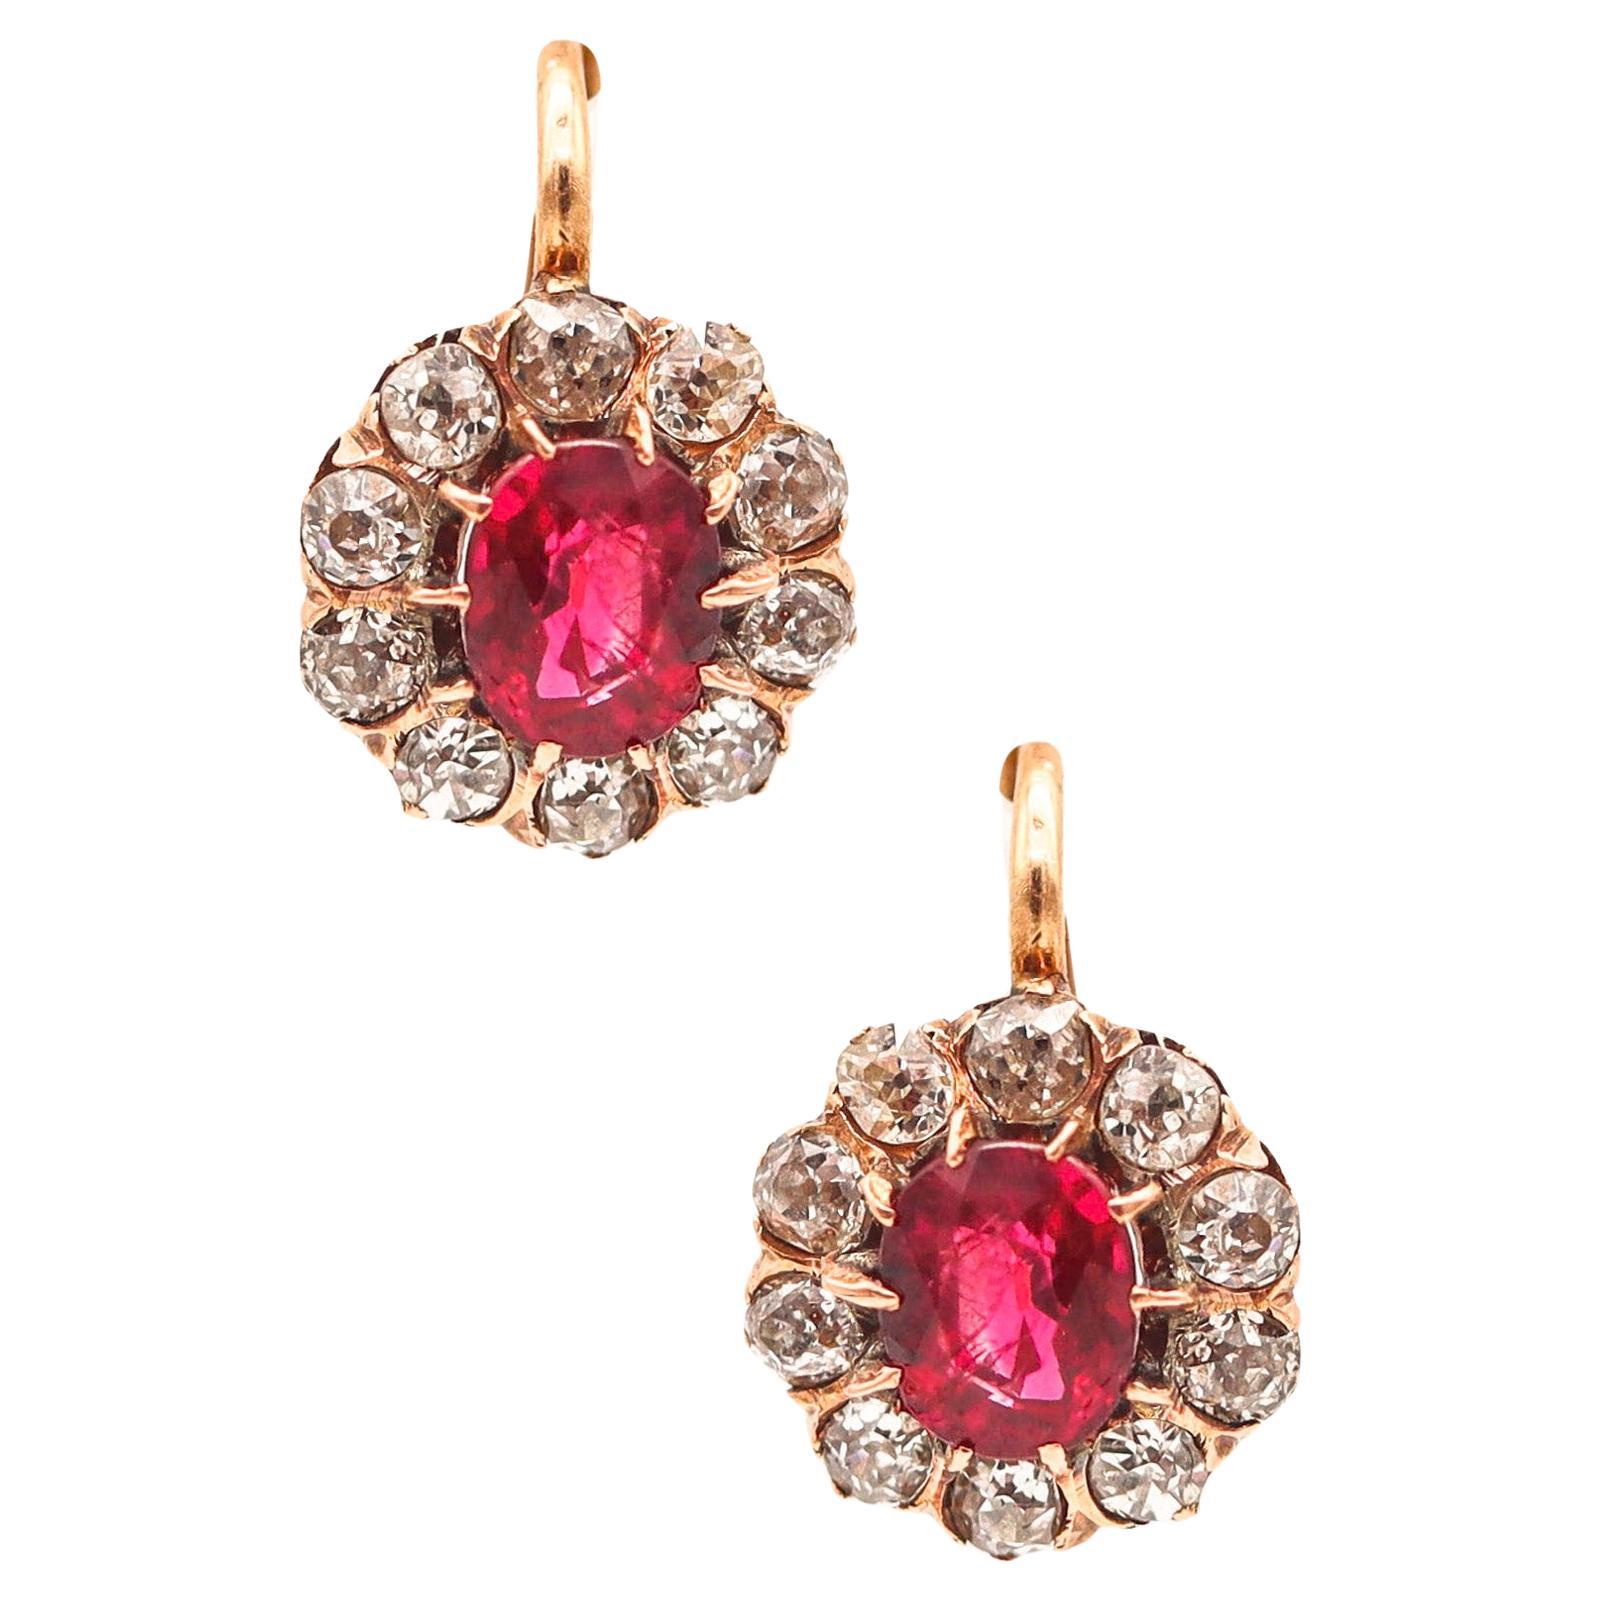 Edwardian 1905 Antique French Earrings 18Kt Gold With 3.54 Ctw Diamonds & Rubies